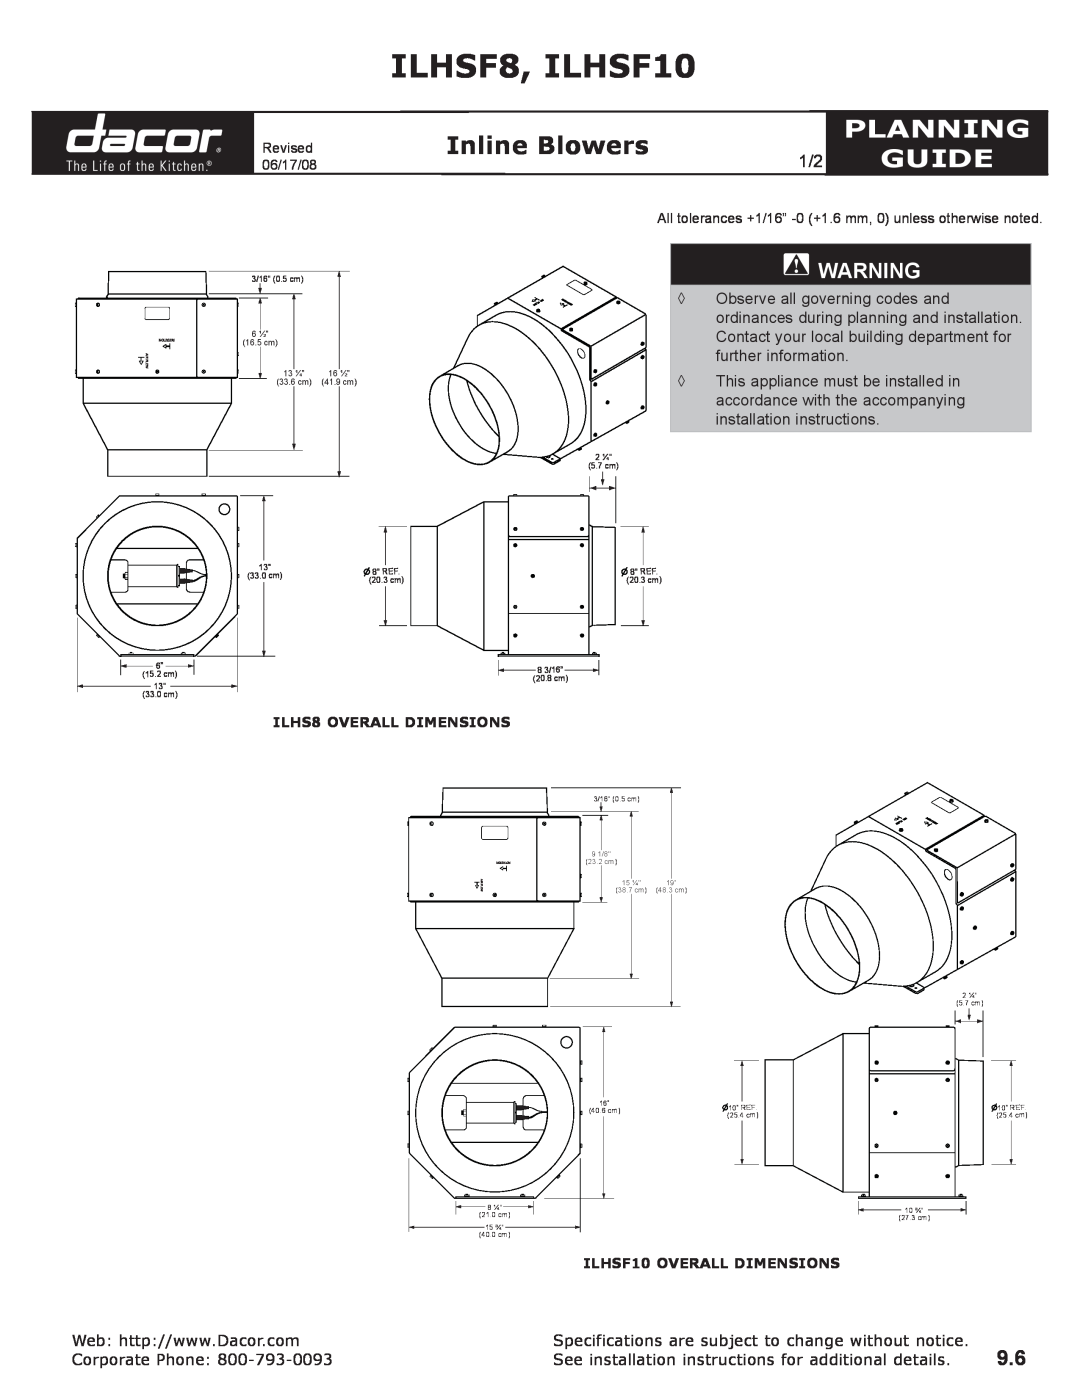 Dacor dimensions ILHSF8, ILHSF10, Inline Blowers, Planning, Guide 